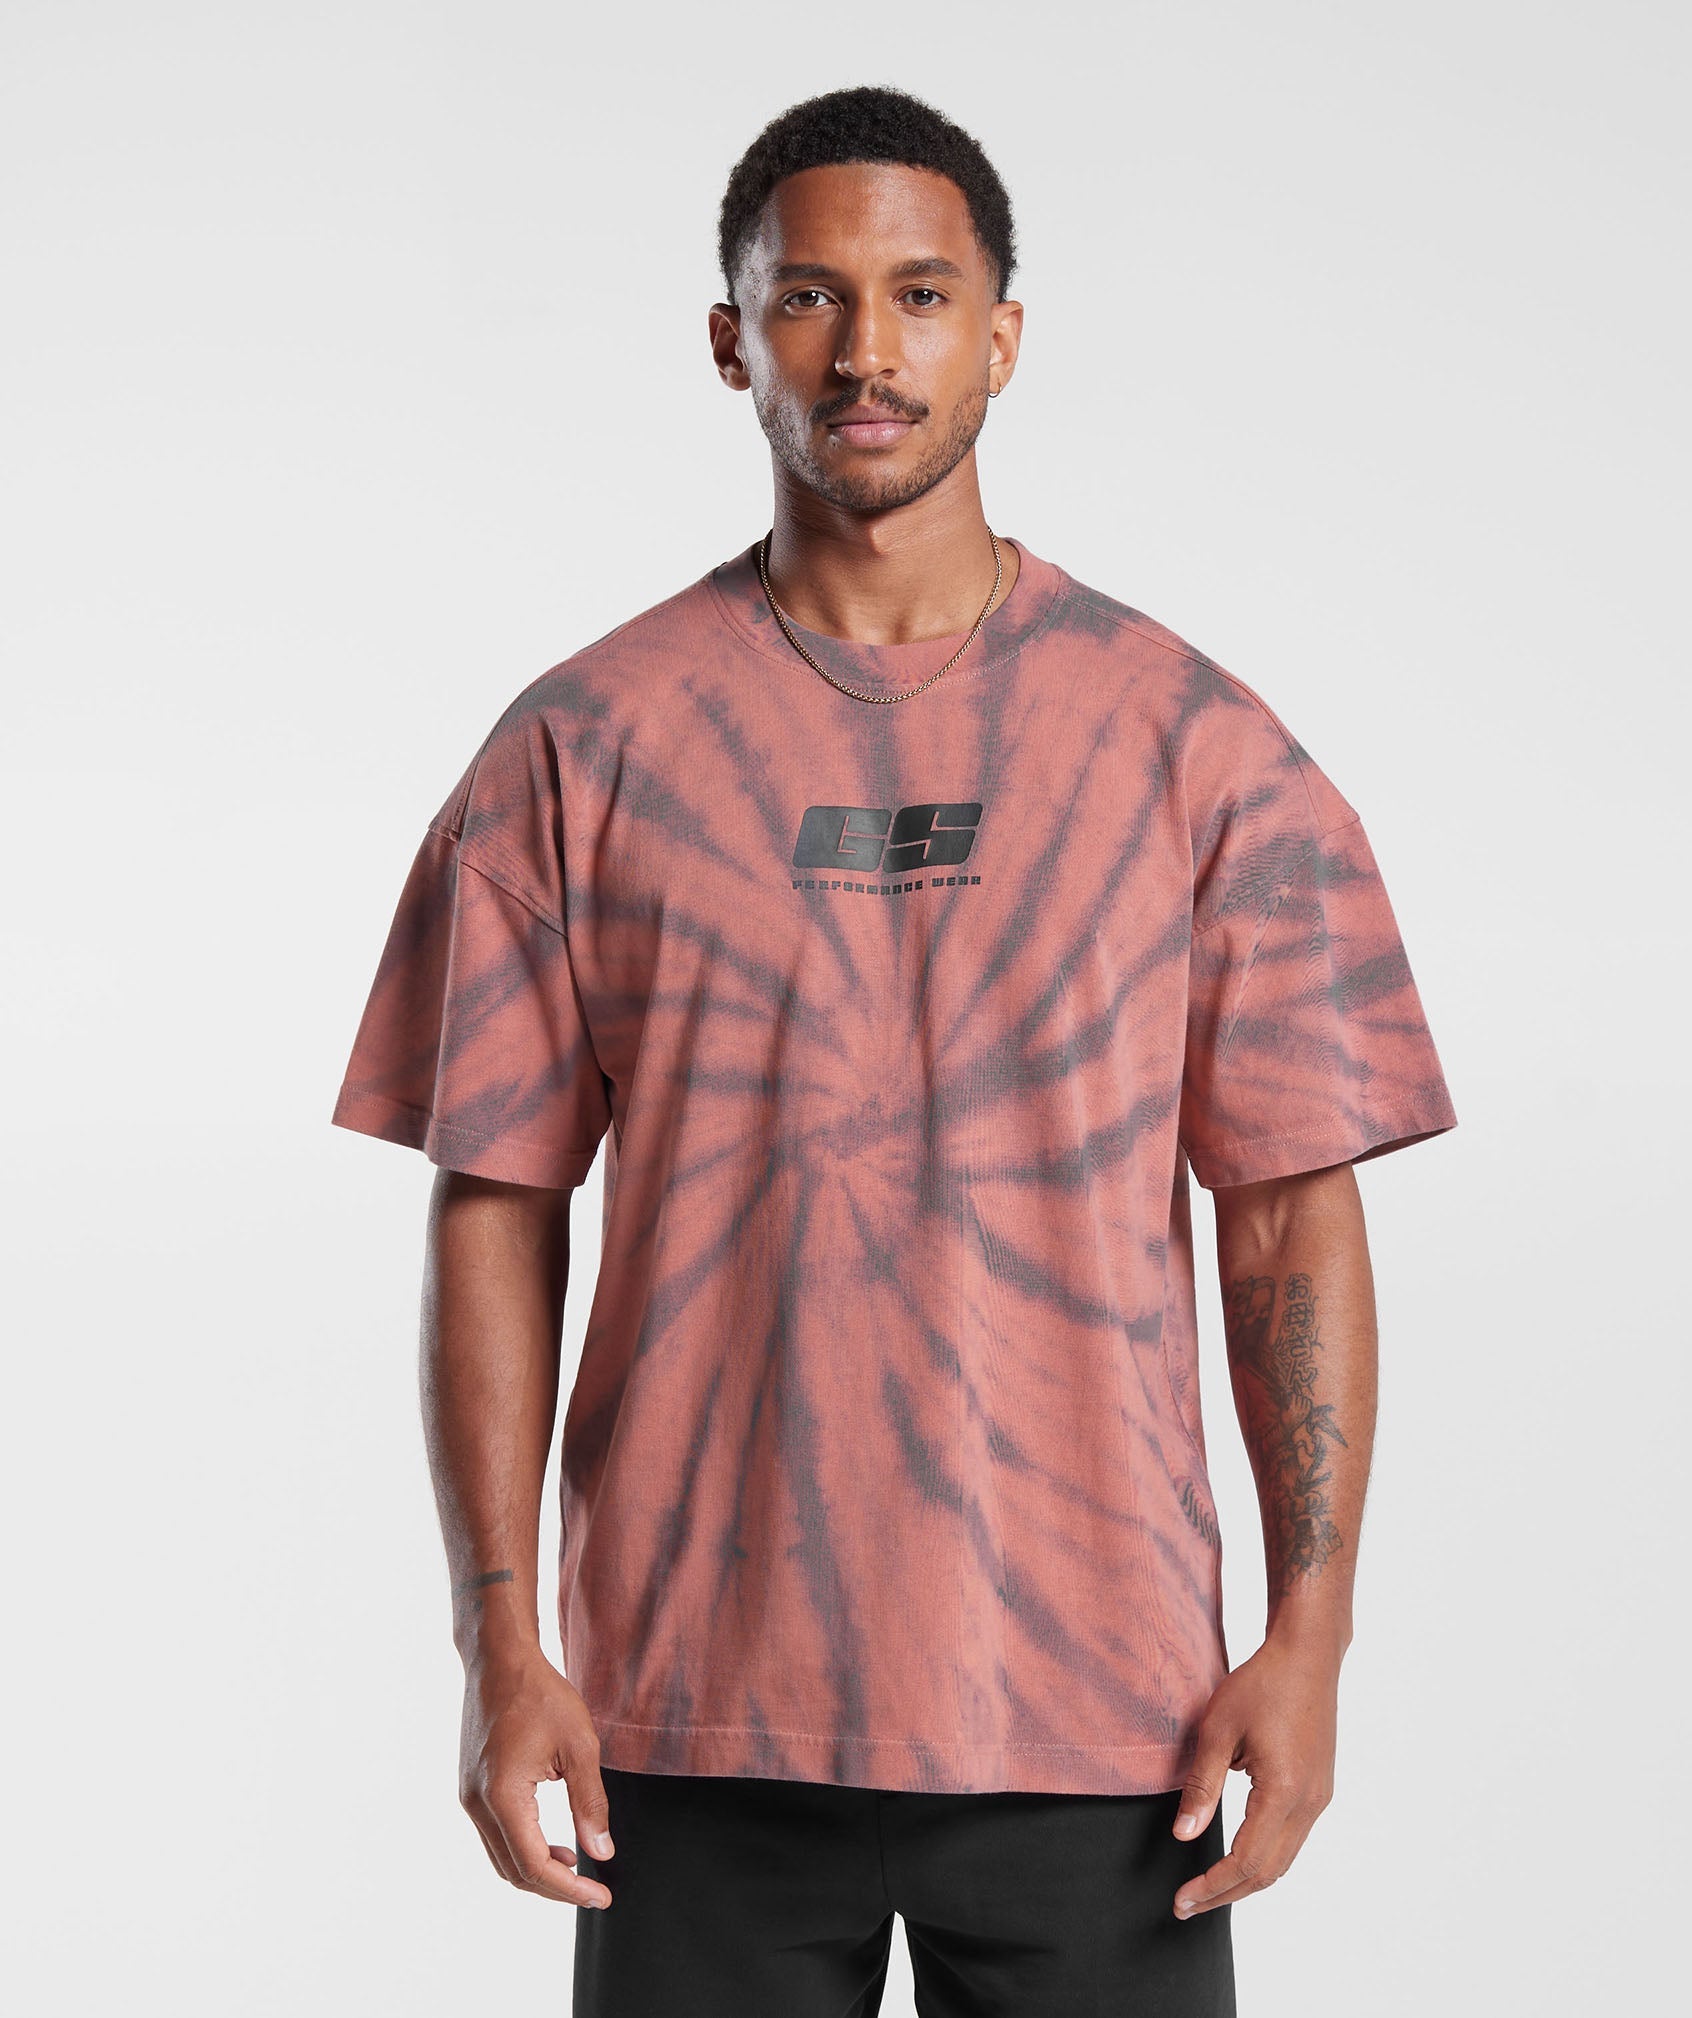 Rest Day T-Shirt in Terracotta Pink/Dusty Maroon/Spiral Optic Wash